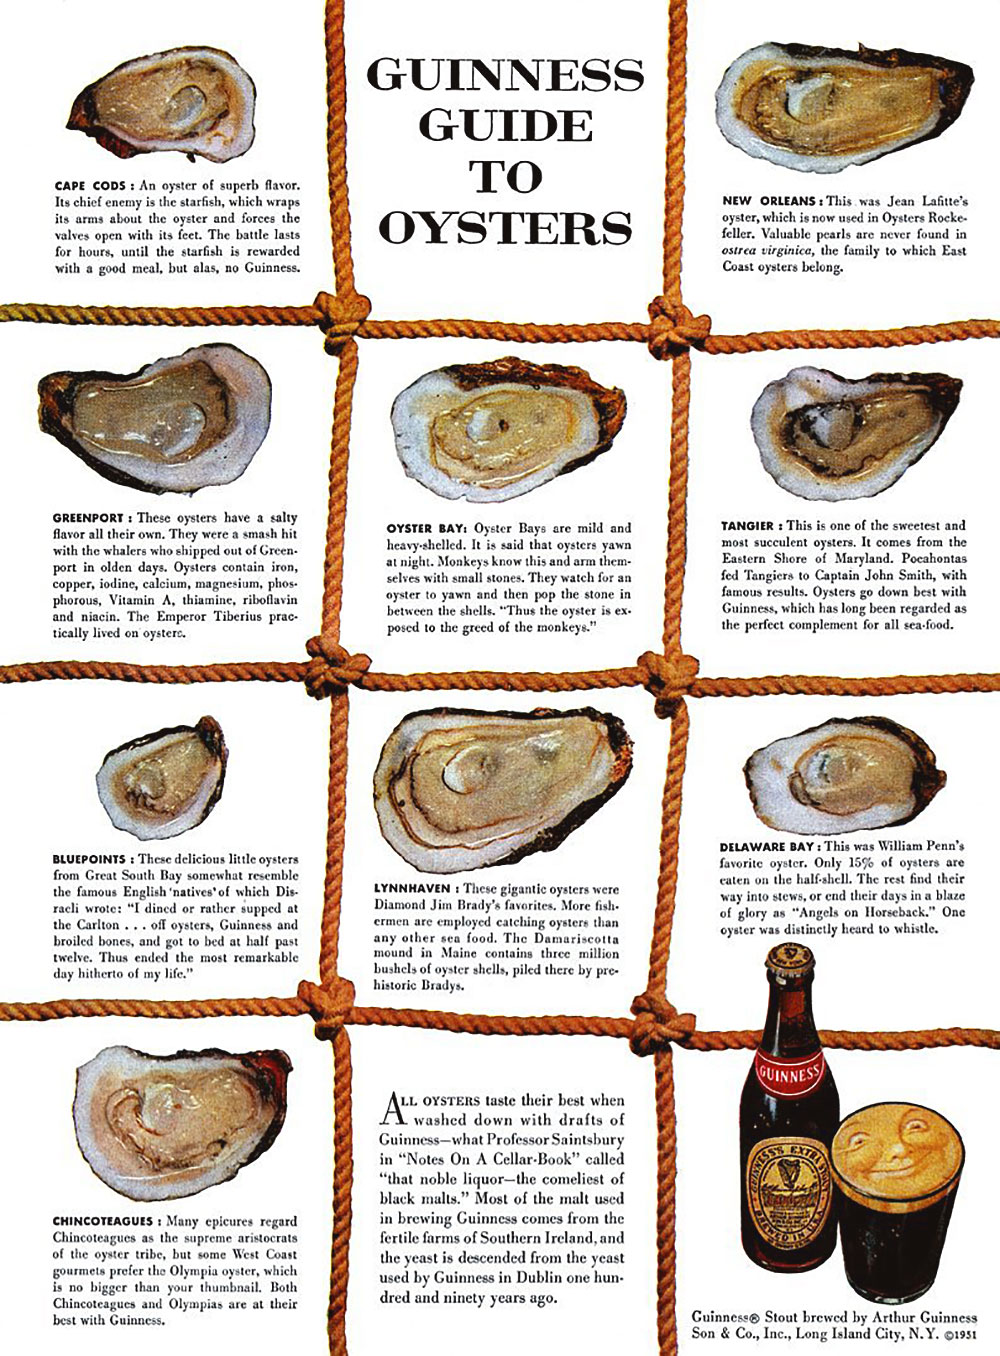 Guiness Guide to Oysters